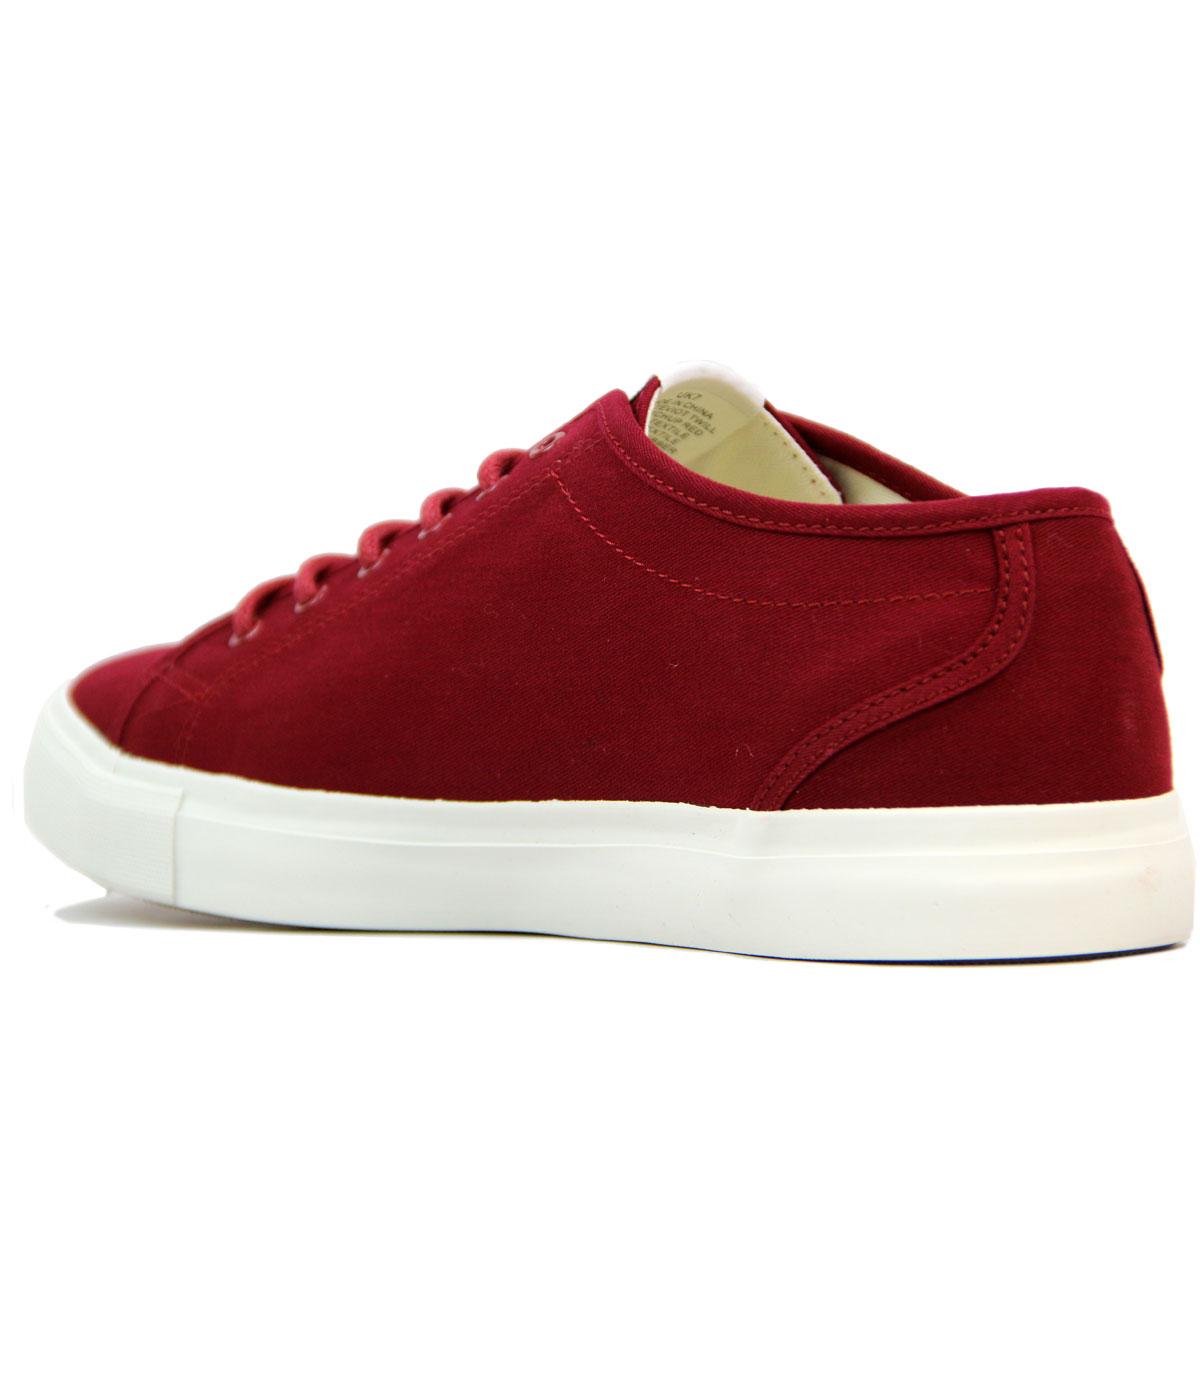 LYLE & SCOTT Teviot Twill Retro 1970s Canvas Tennis Trainers Red